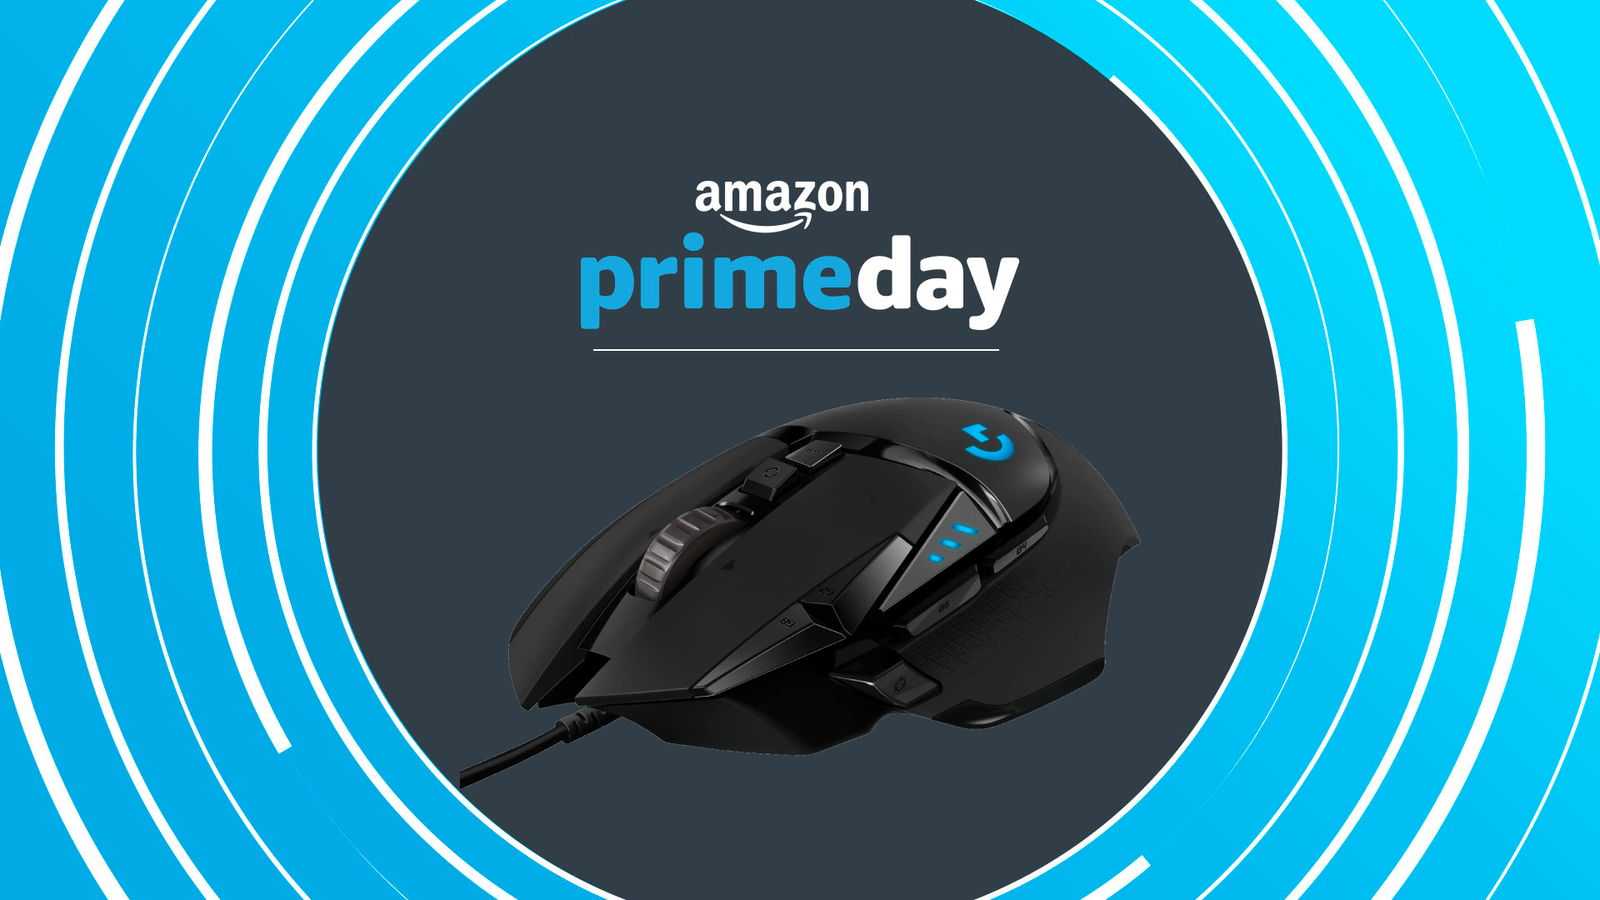 One of the gaming mice is one of the best deals on Amazon Prime Day | Eurogamer.net